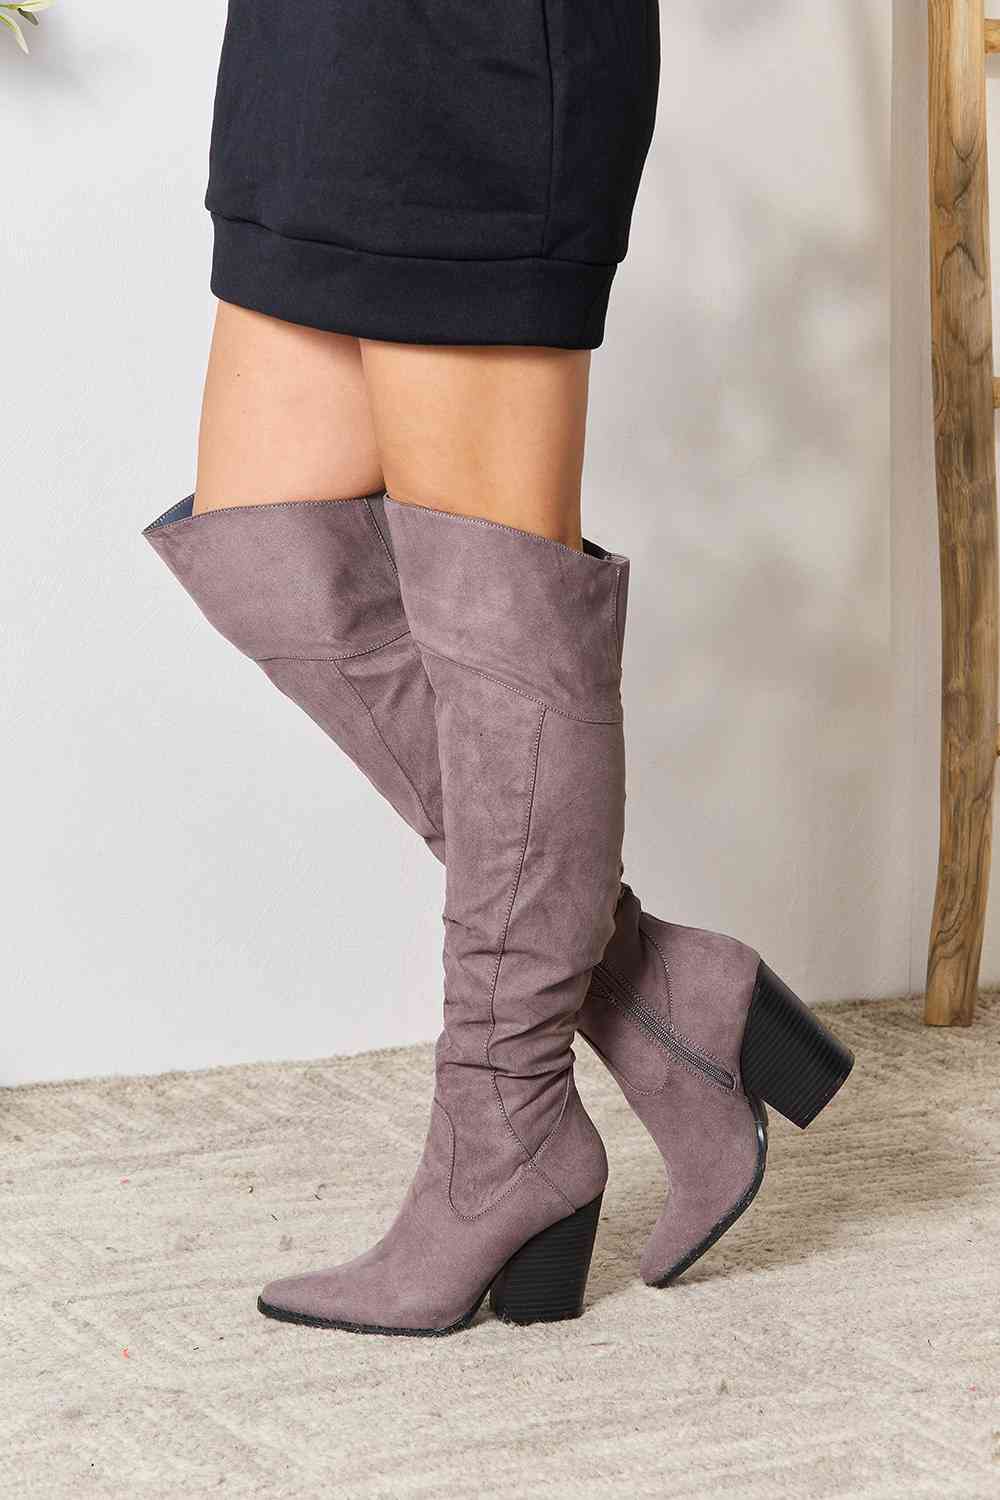 Block Heel Over the Knee High Boots in Grey - Southern Soul Collectives